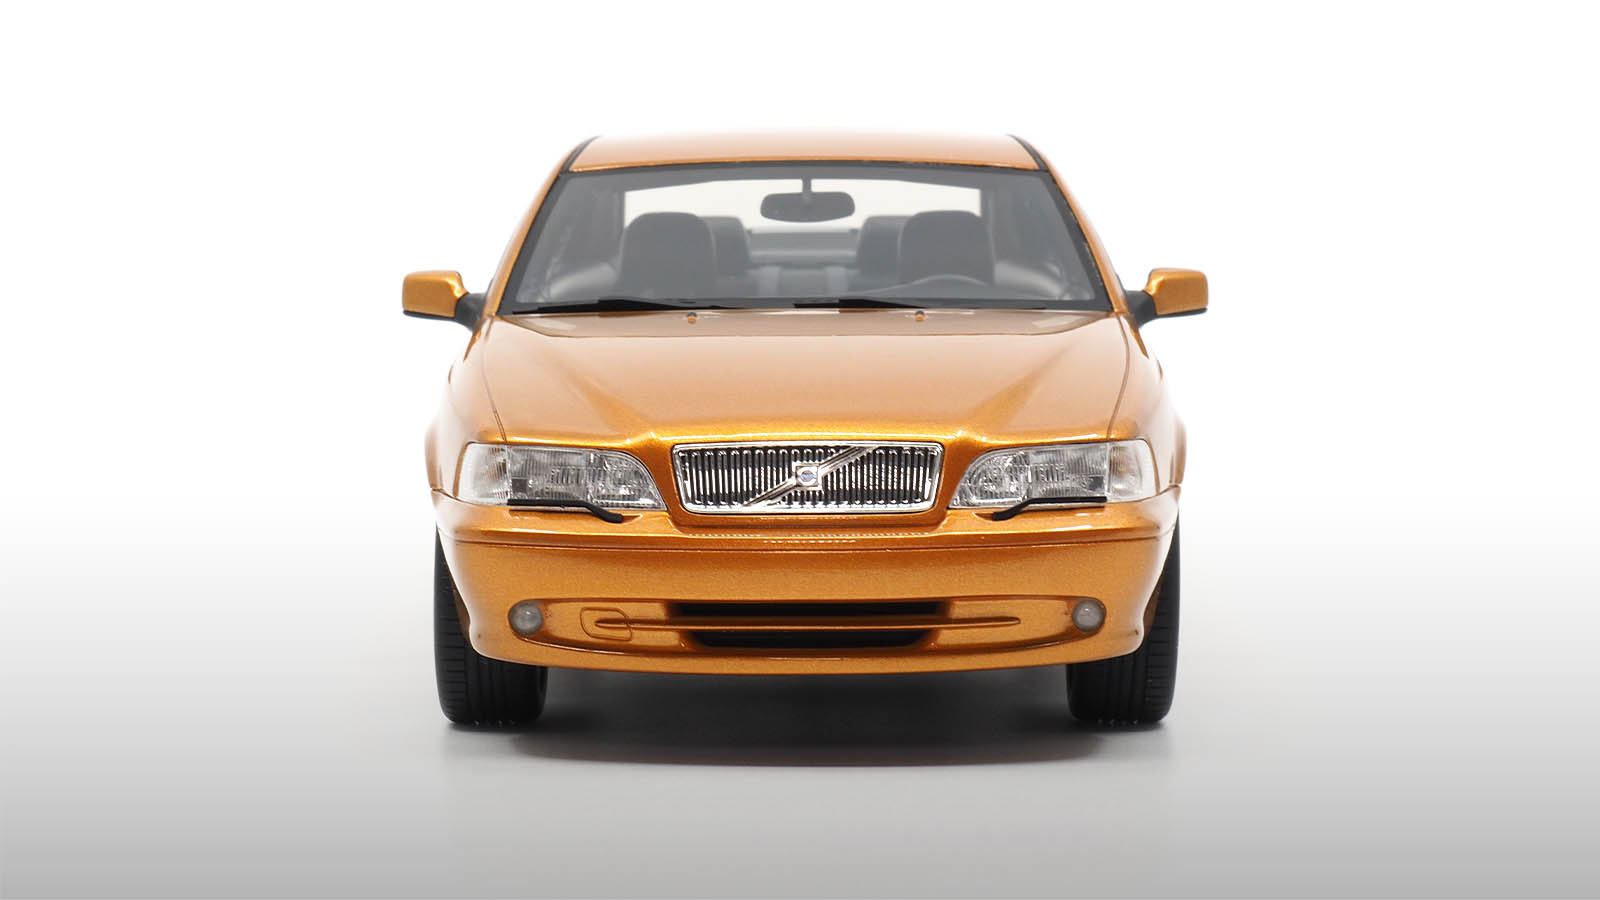 Volvo C70 Coupe | 1 18 Scale Model Car | DNA Collectibles